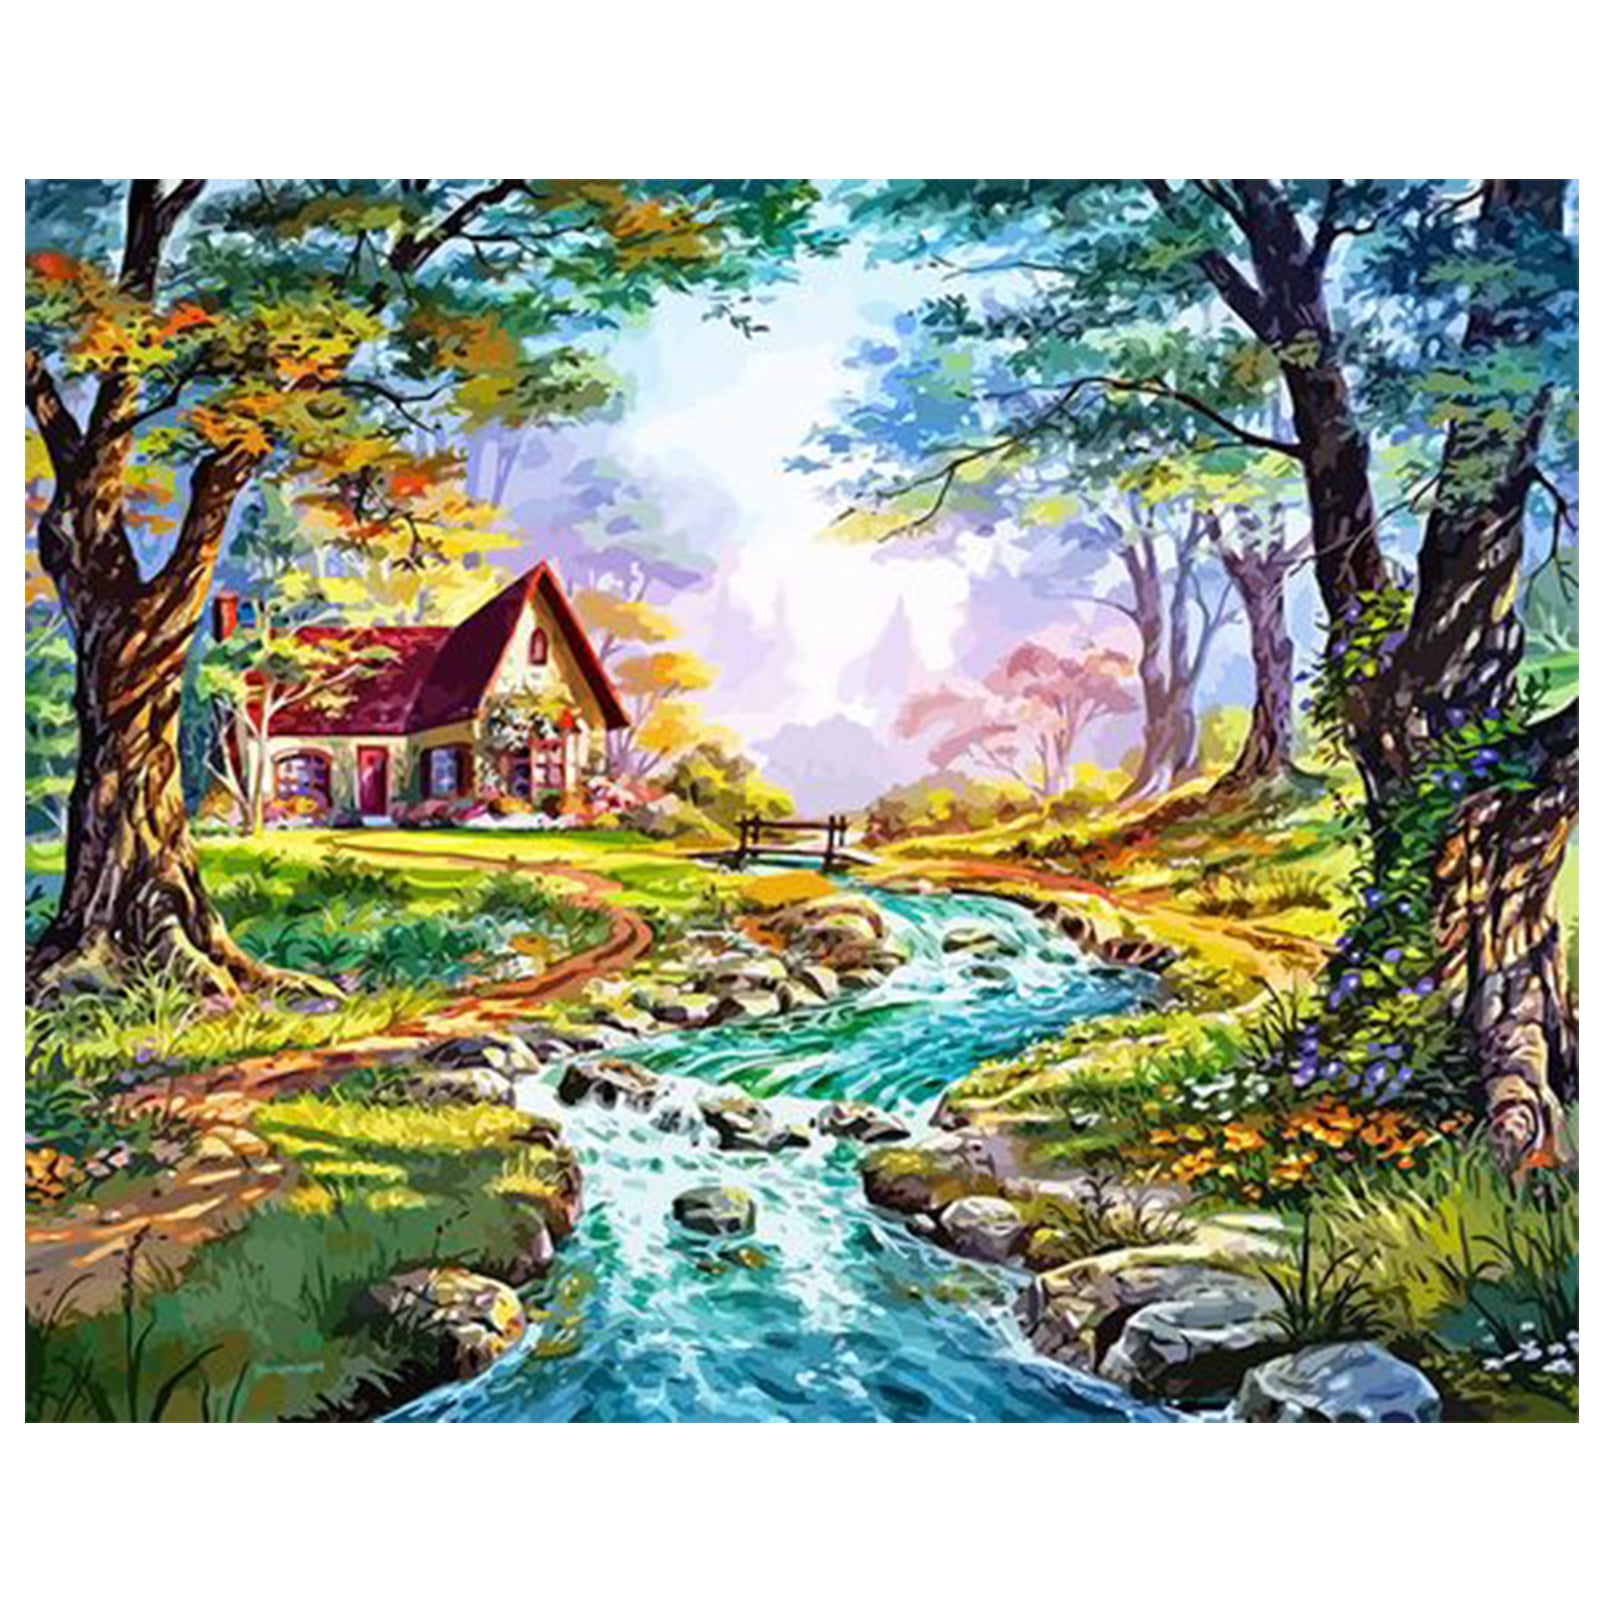 Paint by Numbers Beach Vacation Girl for Adults and Kids DIY Oil Painting Gift Kits Unframed Pre-Printed Canvas Art Home Decoration 16X20 Inch